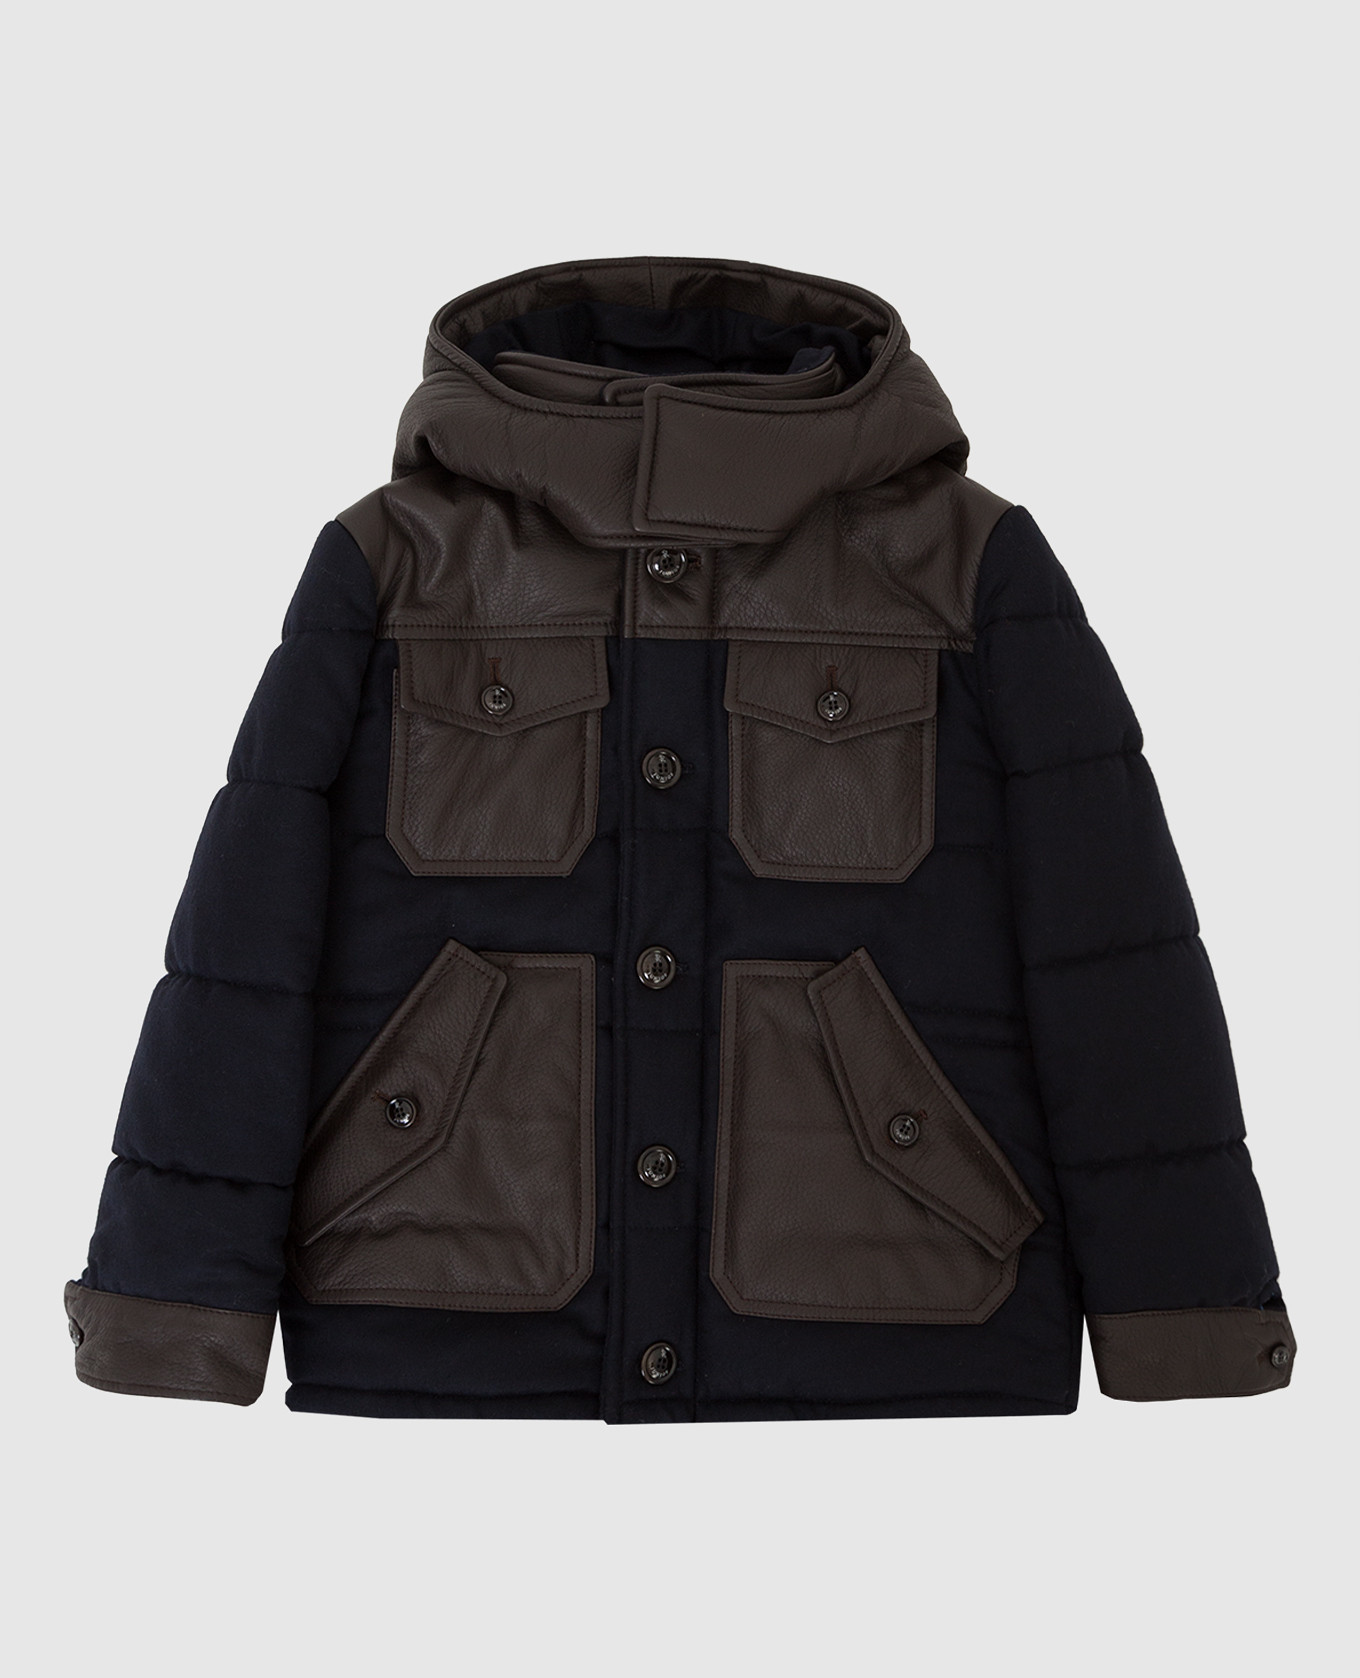 Children's wool jacket with leather inserts